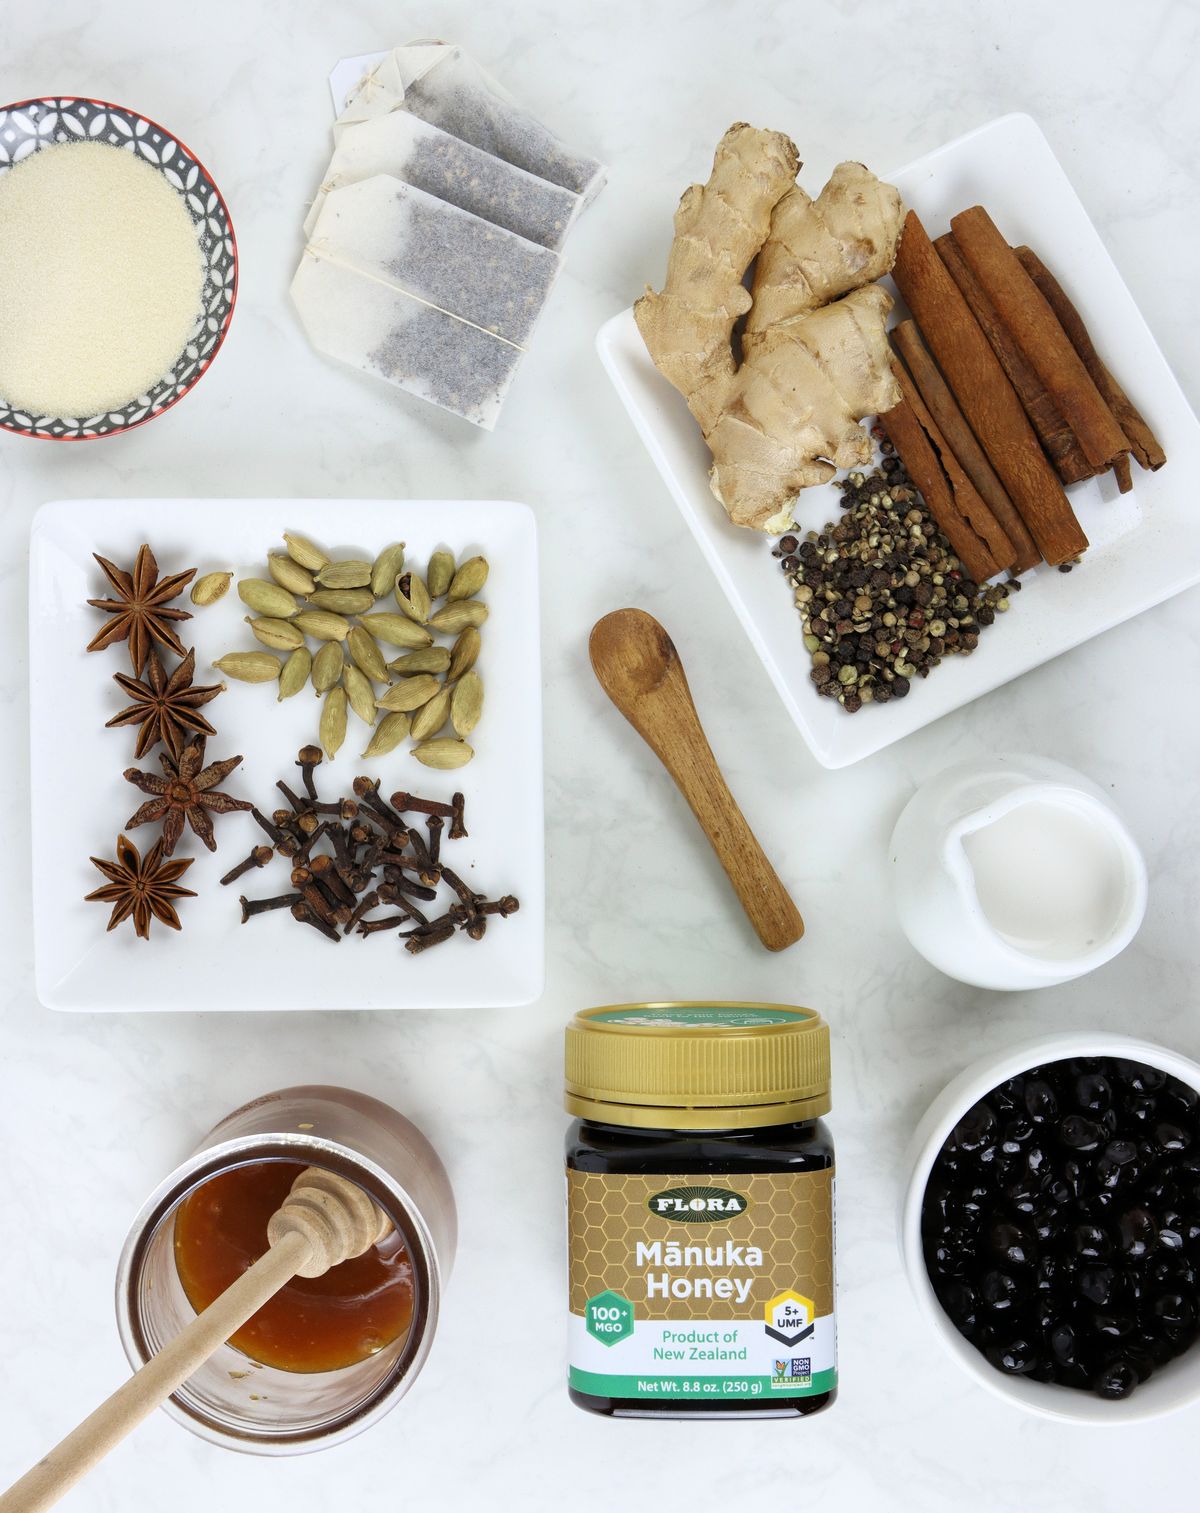 The ingredients found in Chai - Cinnamon, Ginger, Honey, Clove, Star Anise, and Cardamum